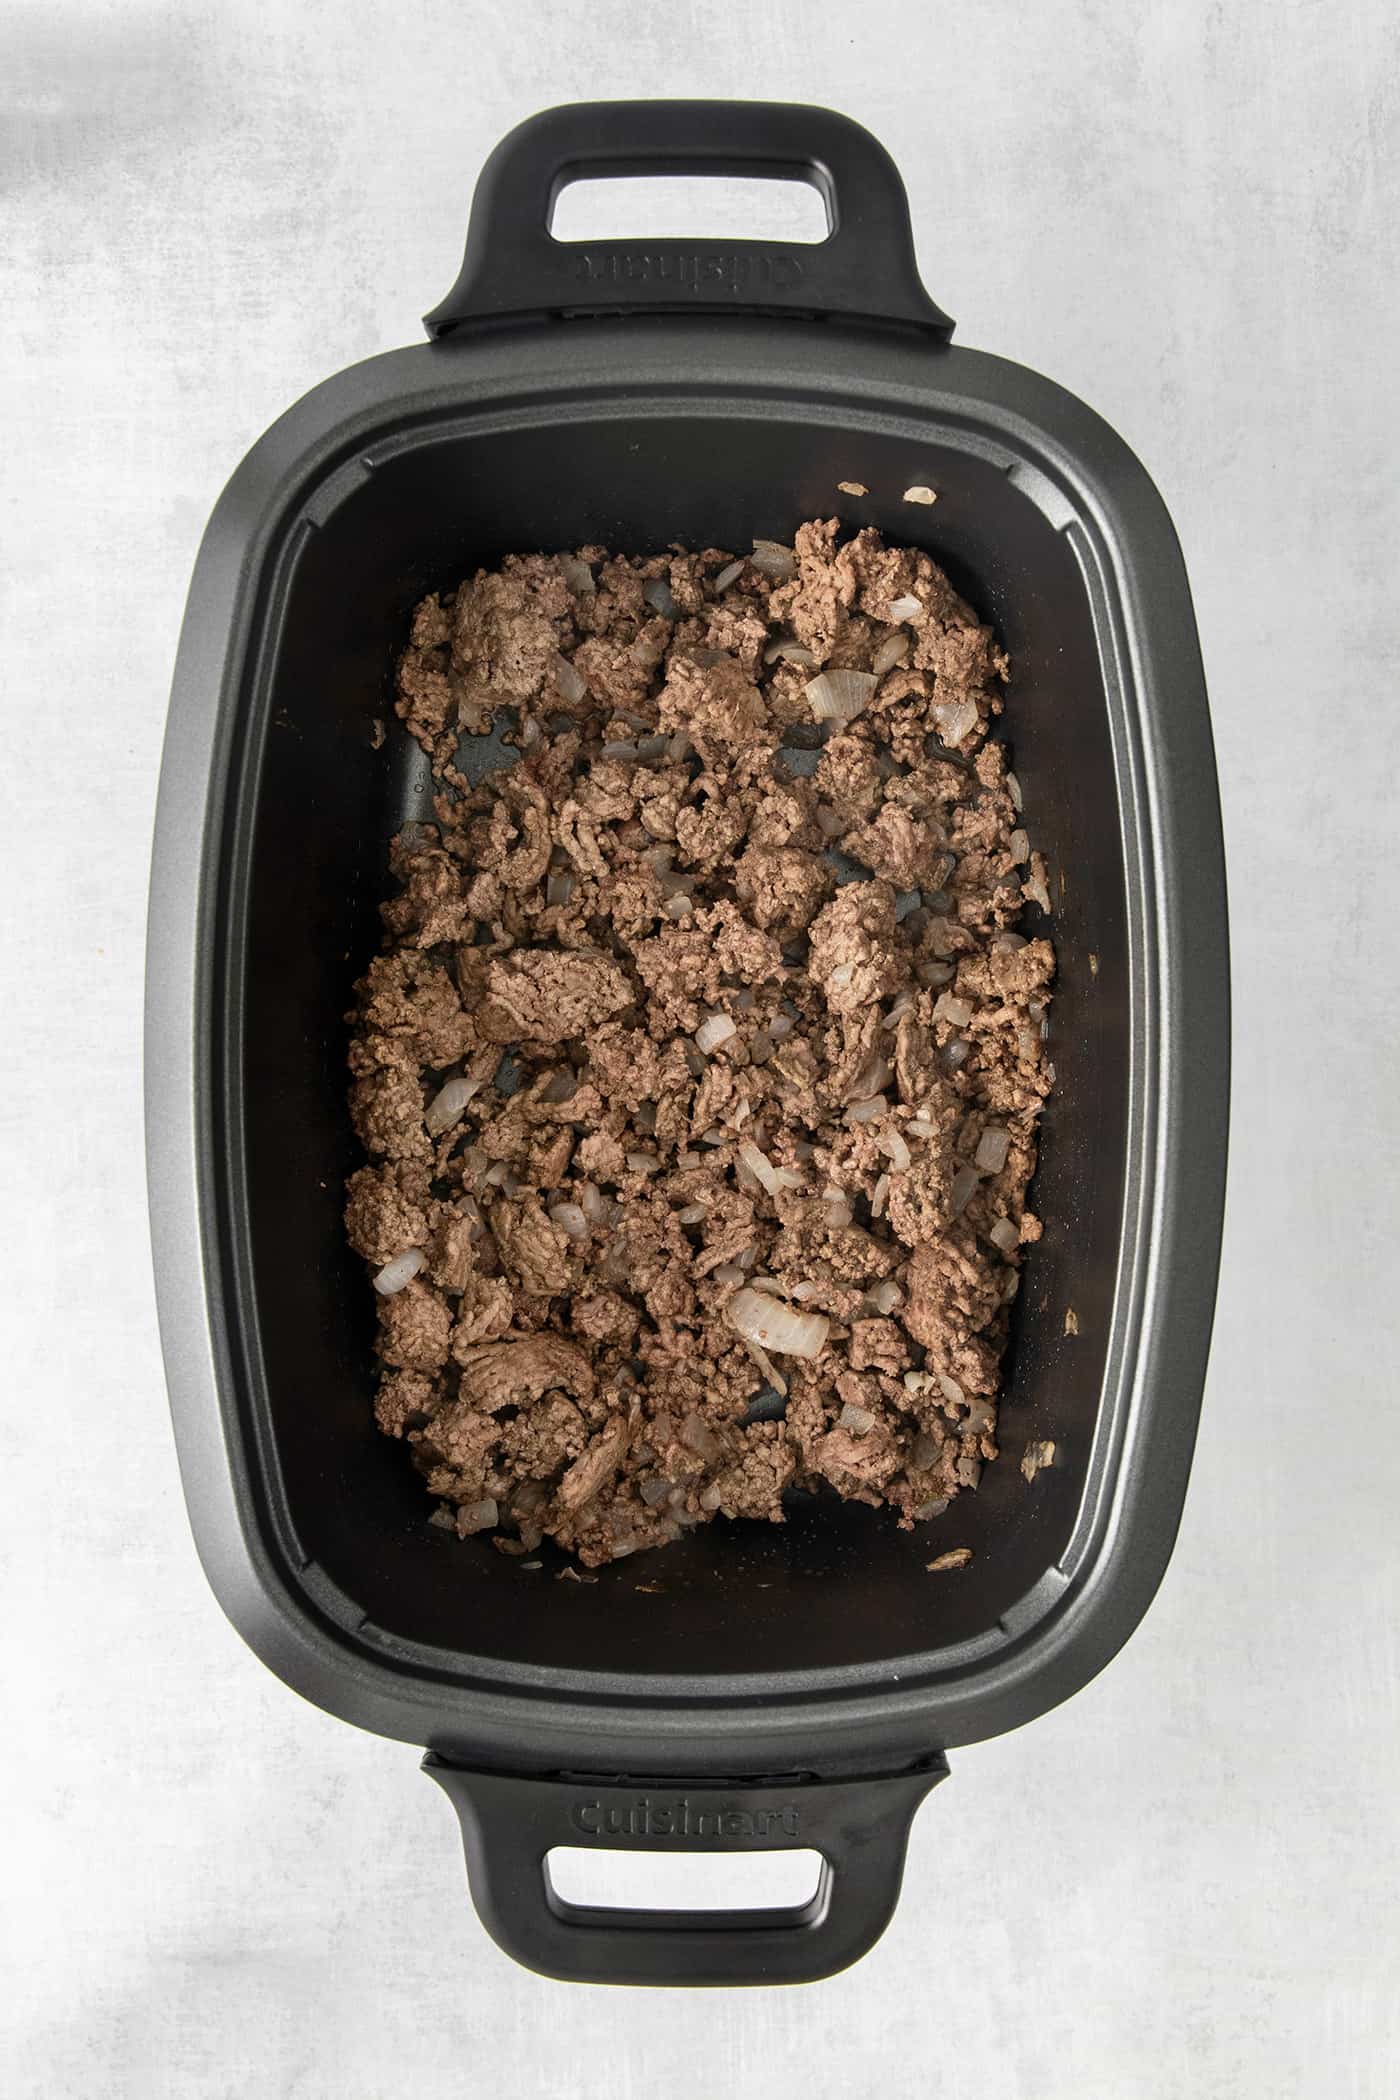 Cooked ground beef in the bottom of a slow cooker